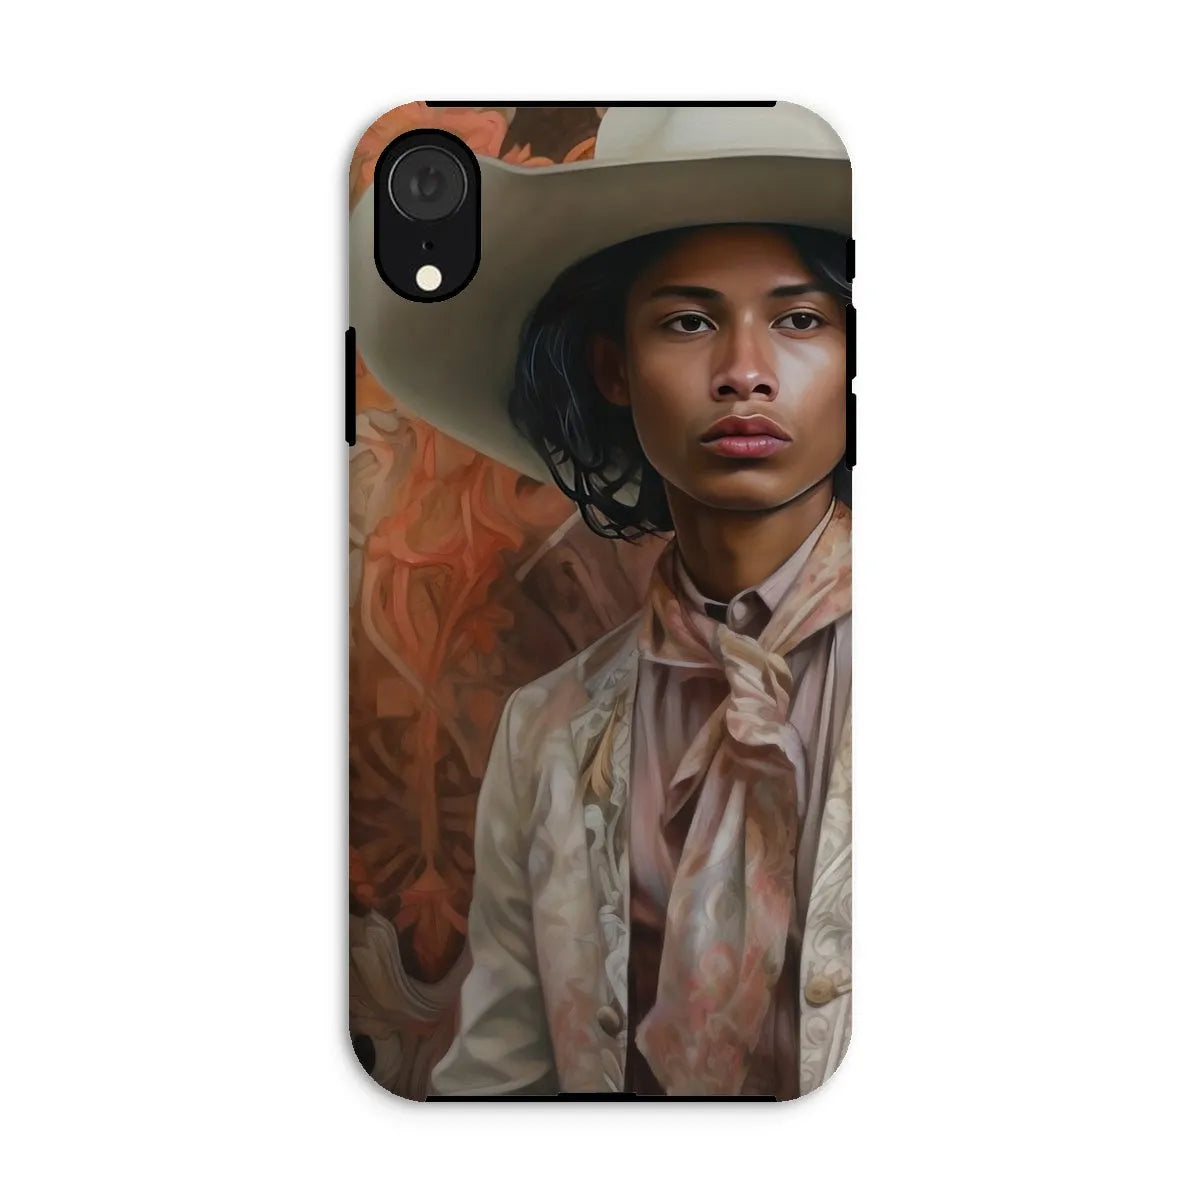 Arjuna The Gay Cowboy - Gay Aesthetic Art Phone Case - Iphone Xr / Matte - Mobile Phone Cases - Aesthetic Art